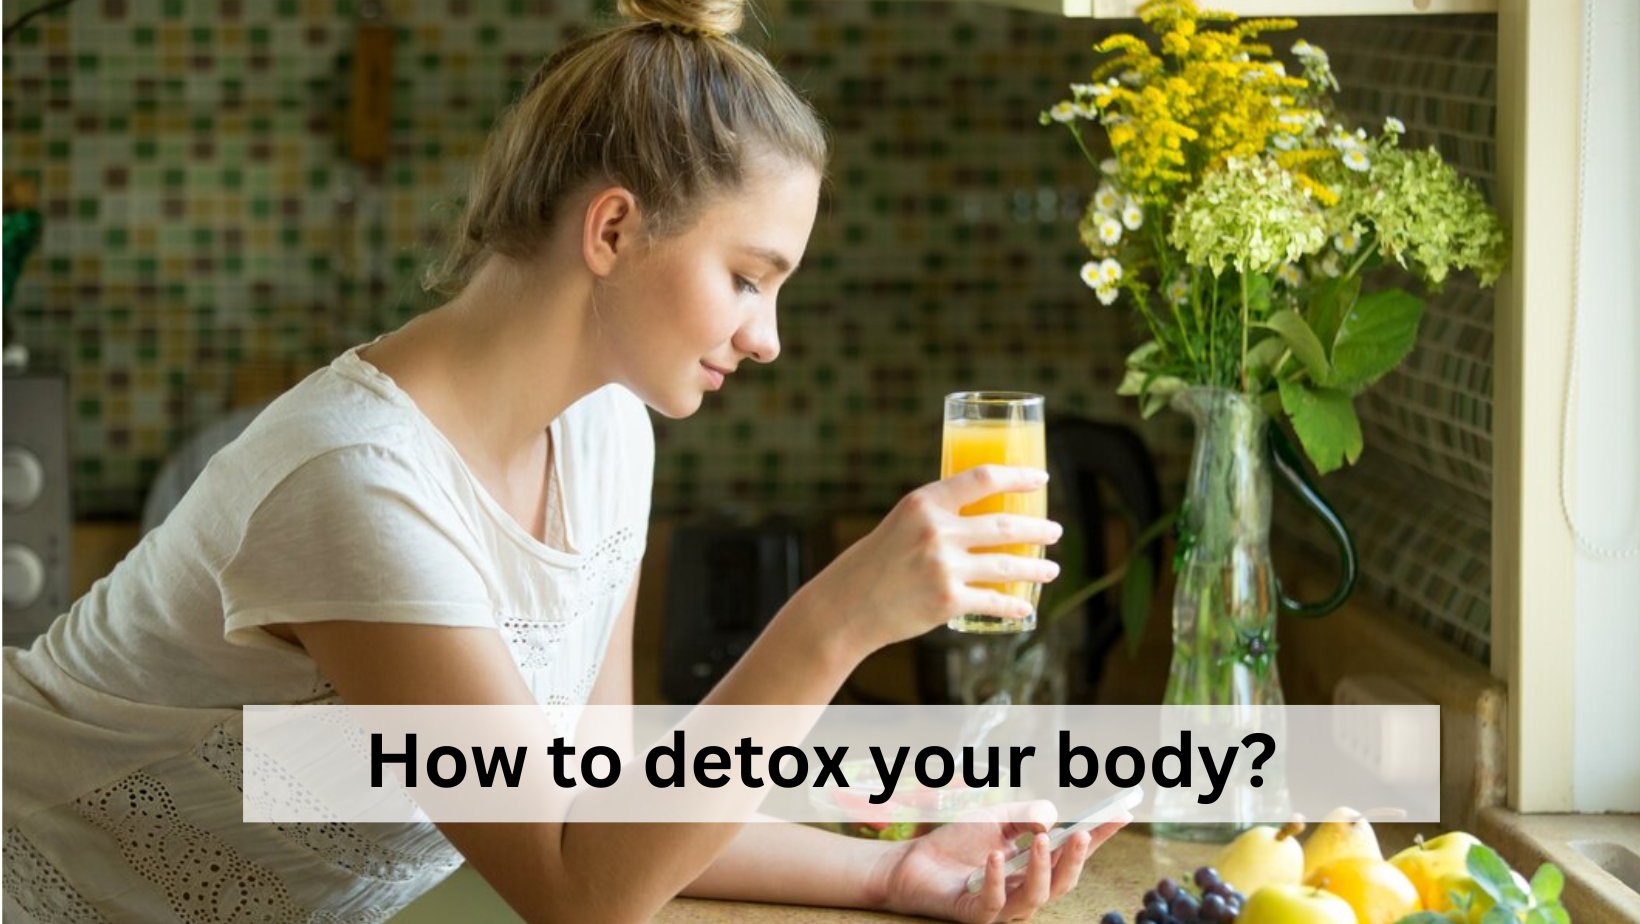 How to detox your body